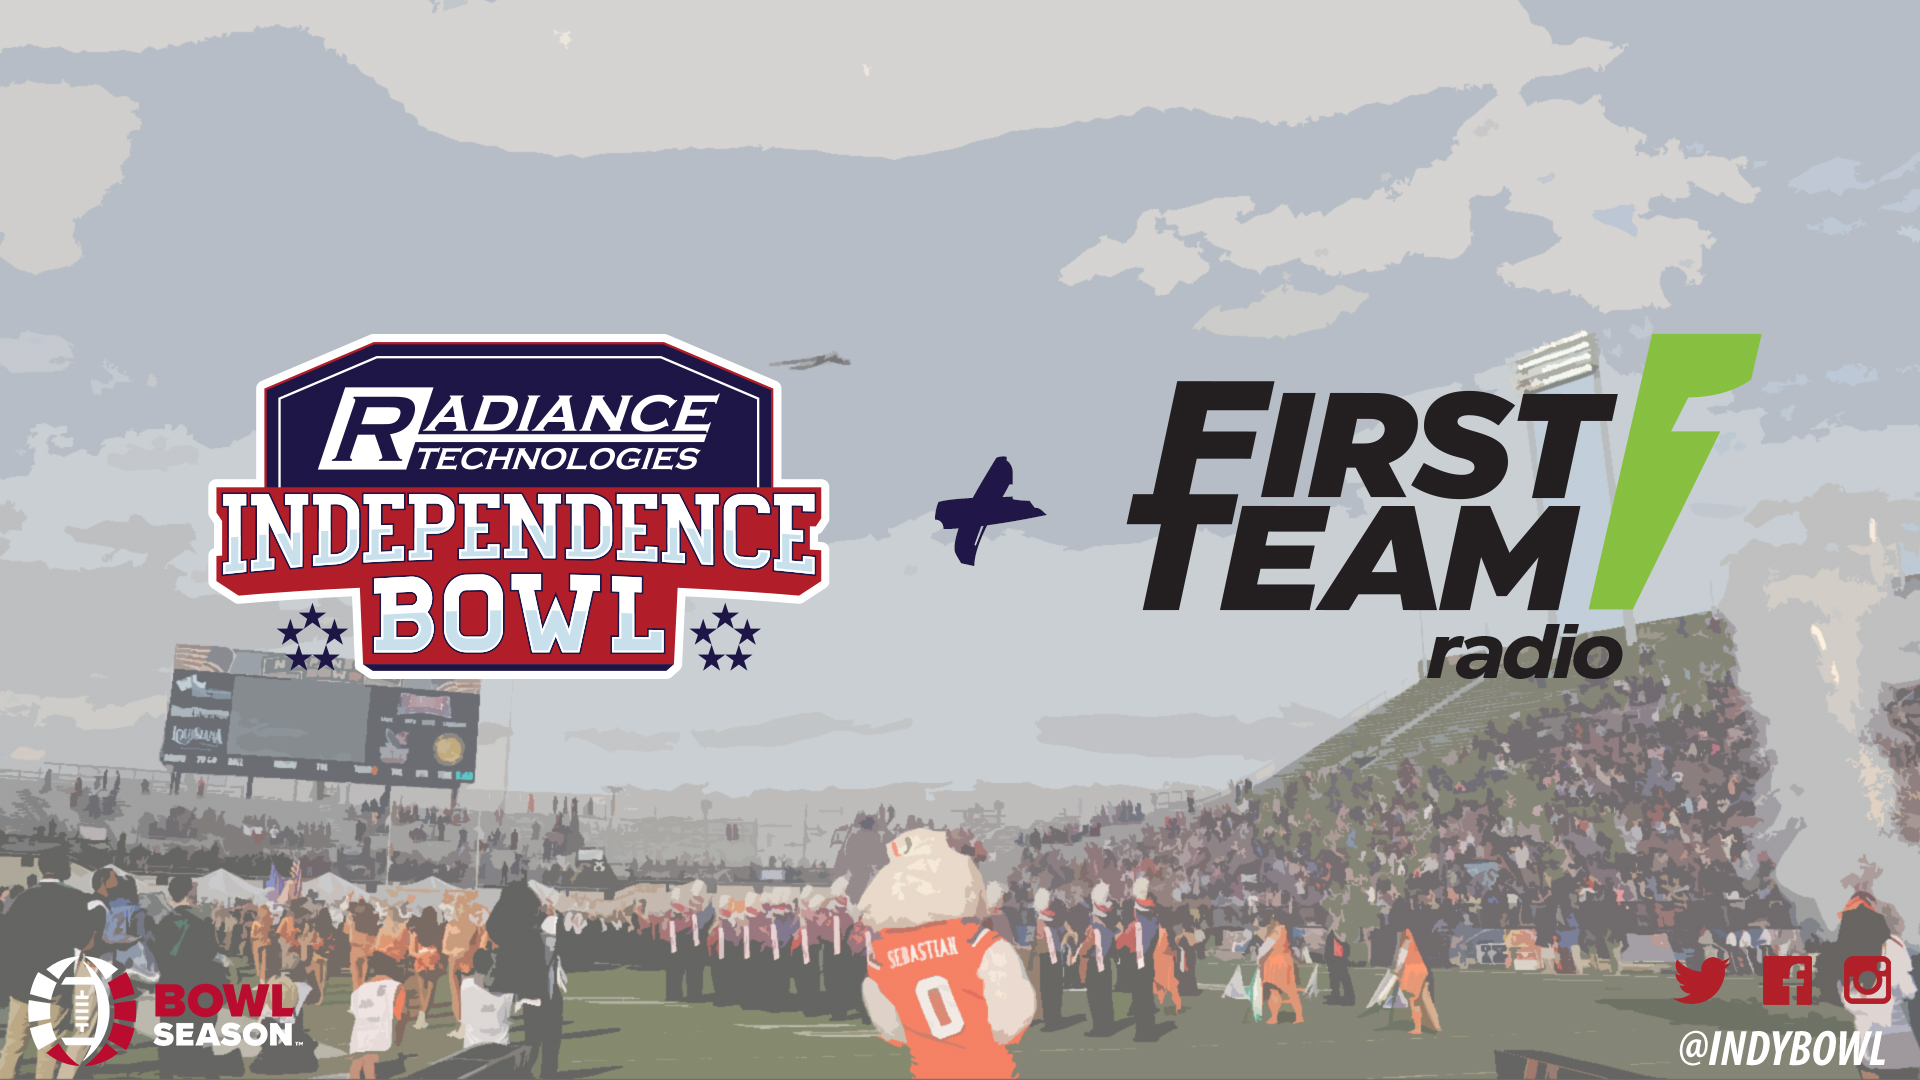 I Bowl Partners With First Team Radio As National Radio Partner Independence Bowl